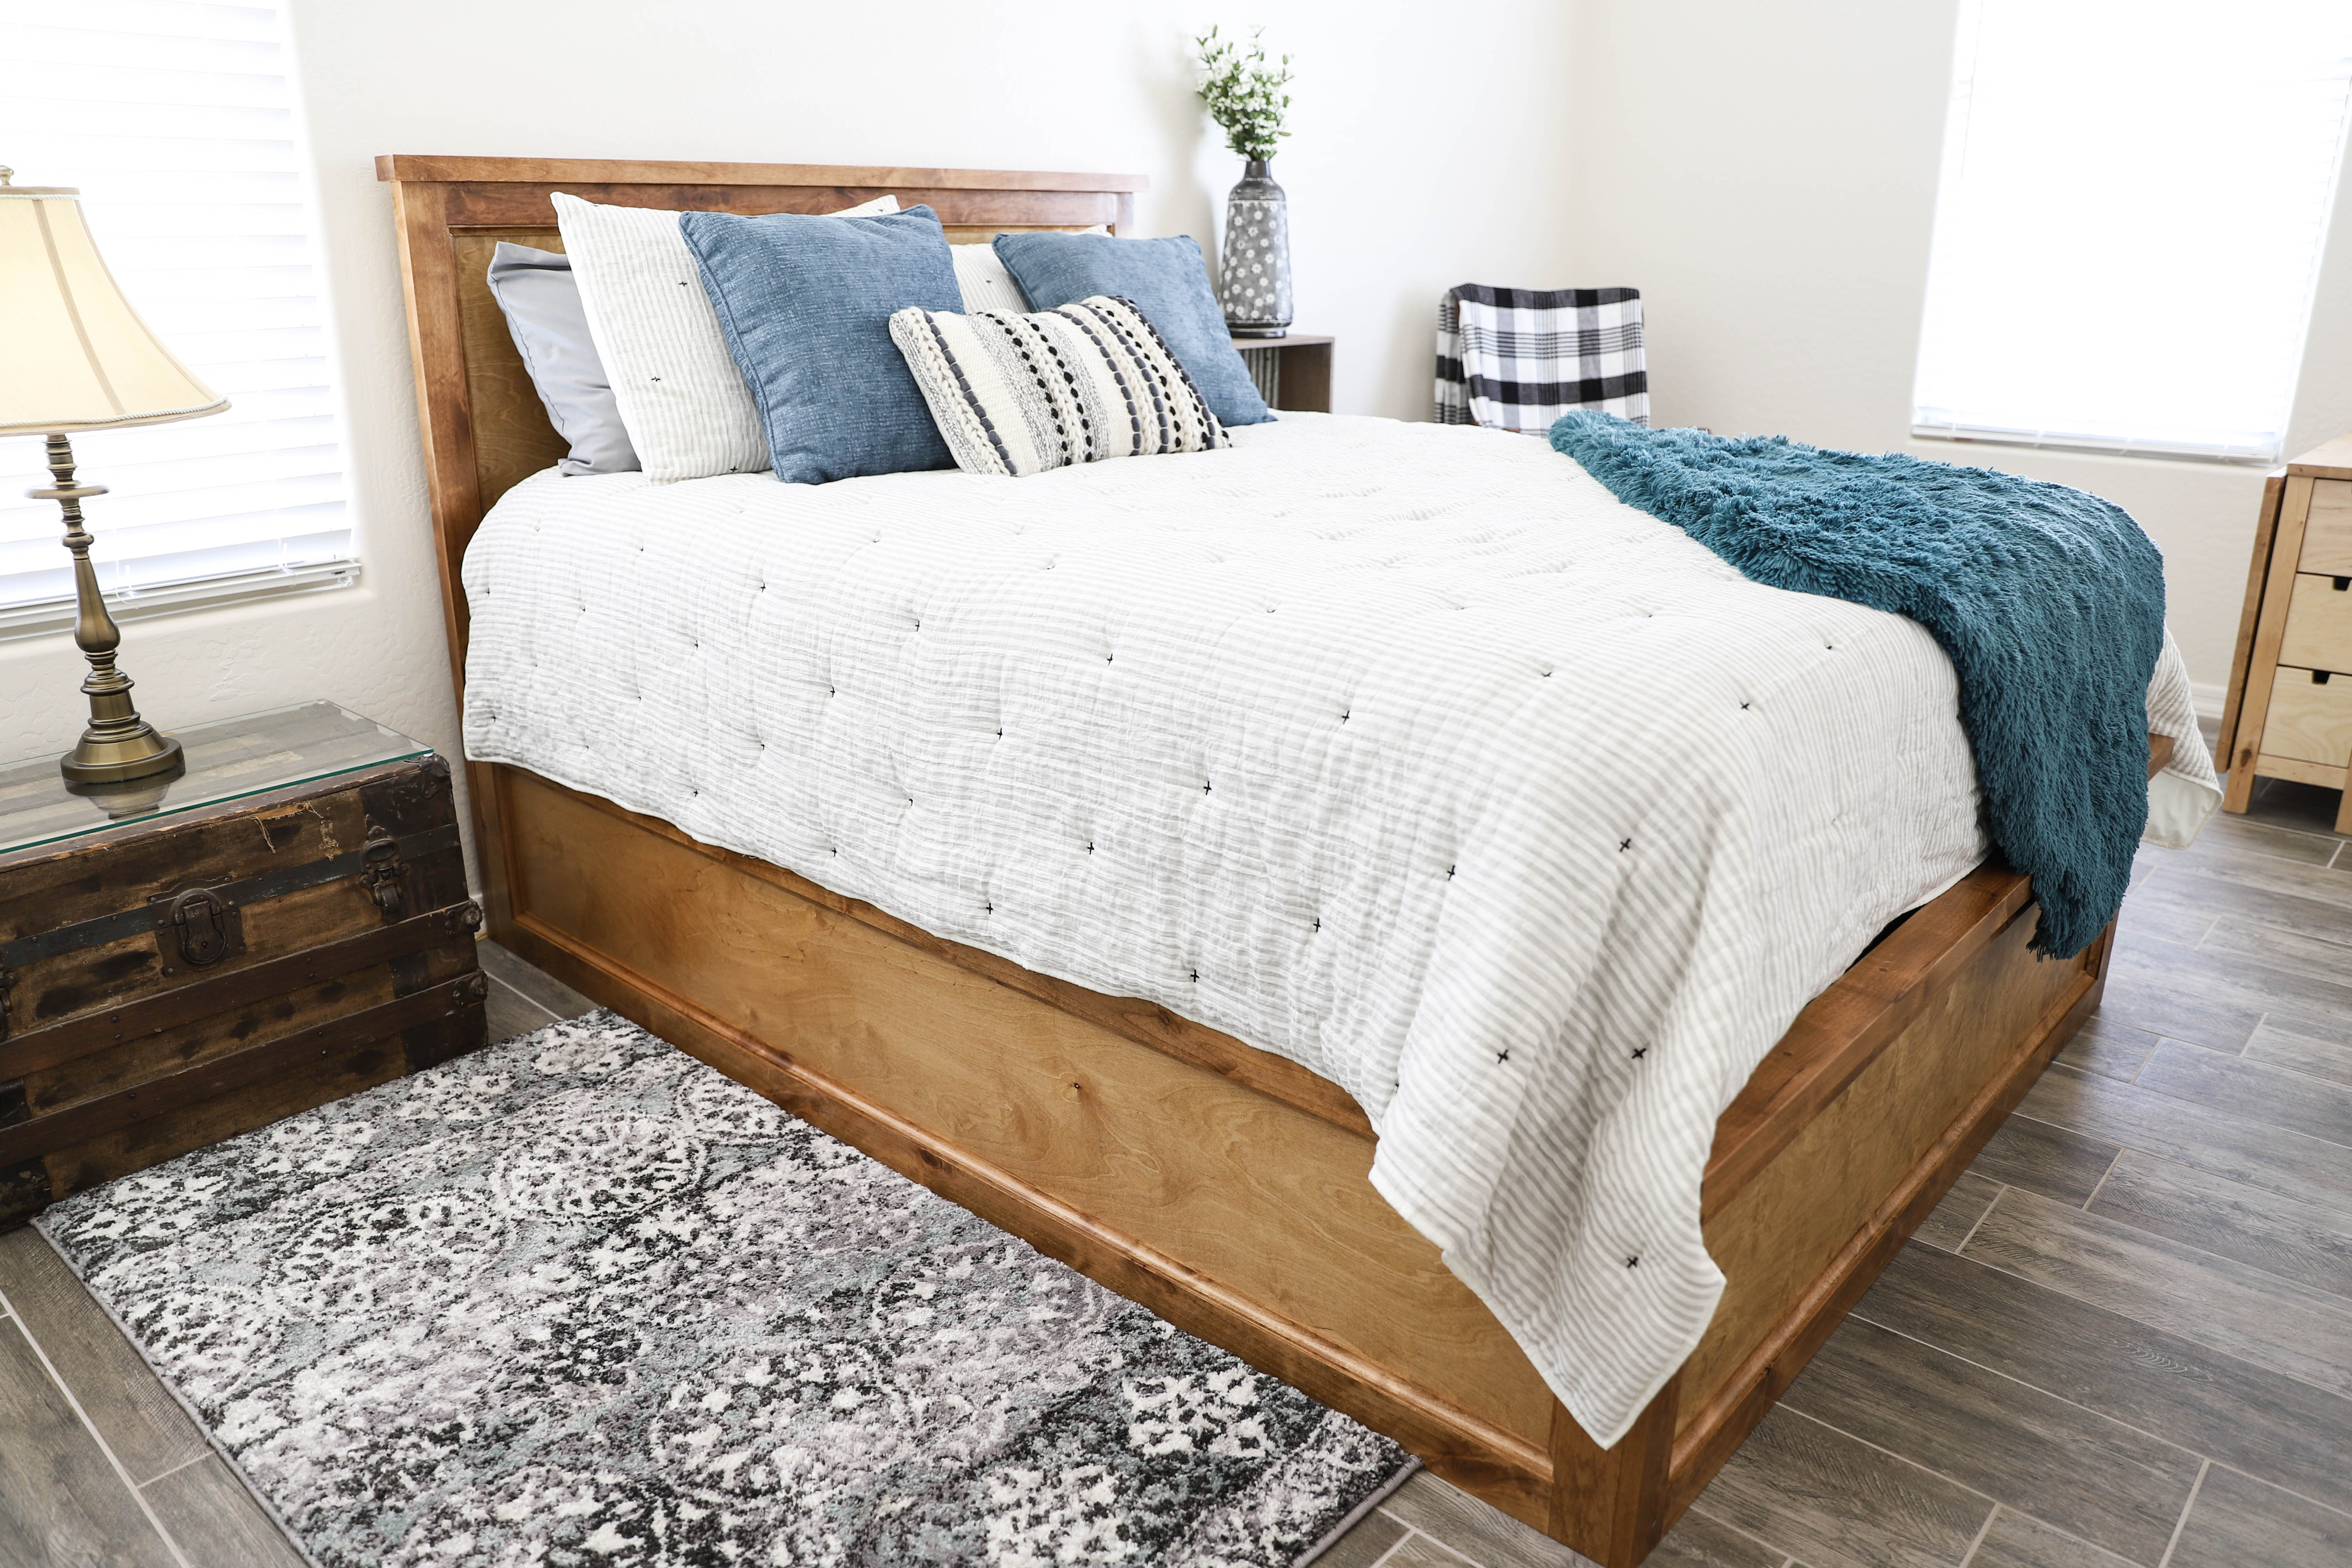 How To Build A Queen Size Storage Bed, Platform Bed Frame With Storage Plans